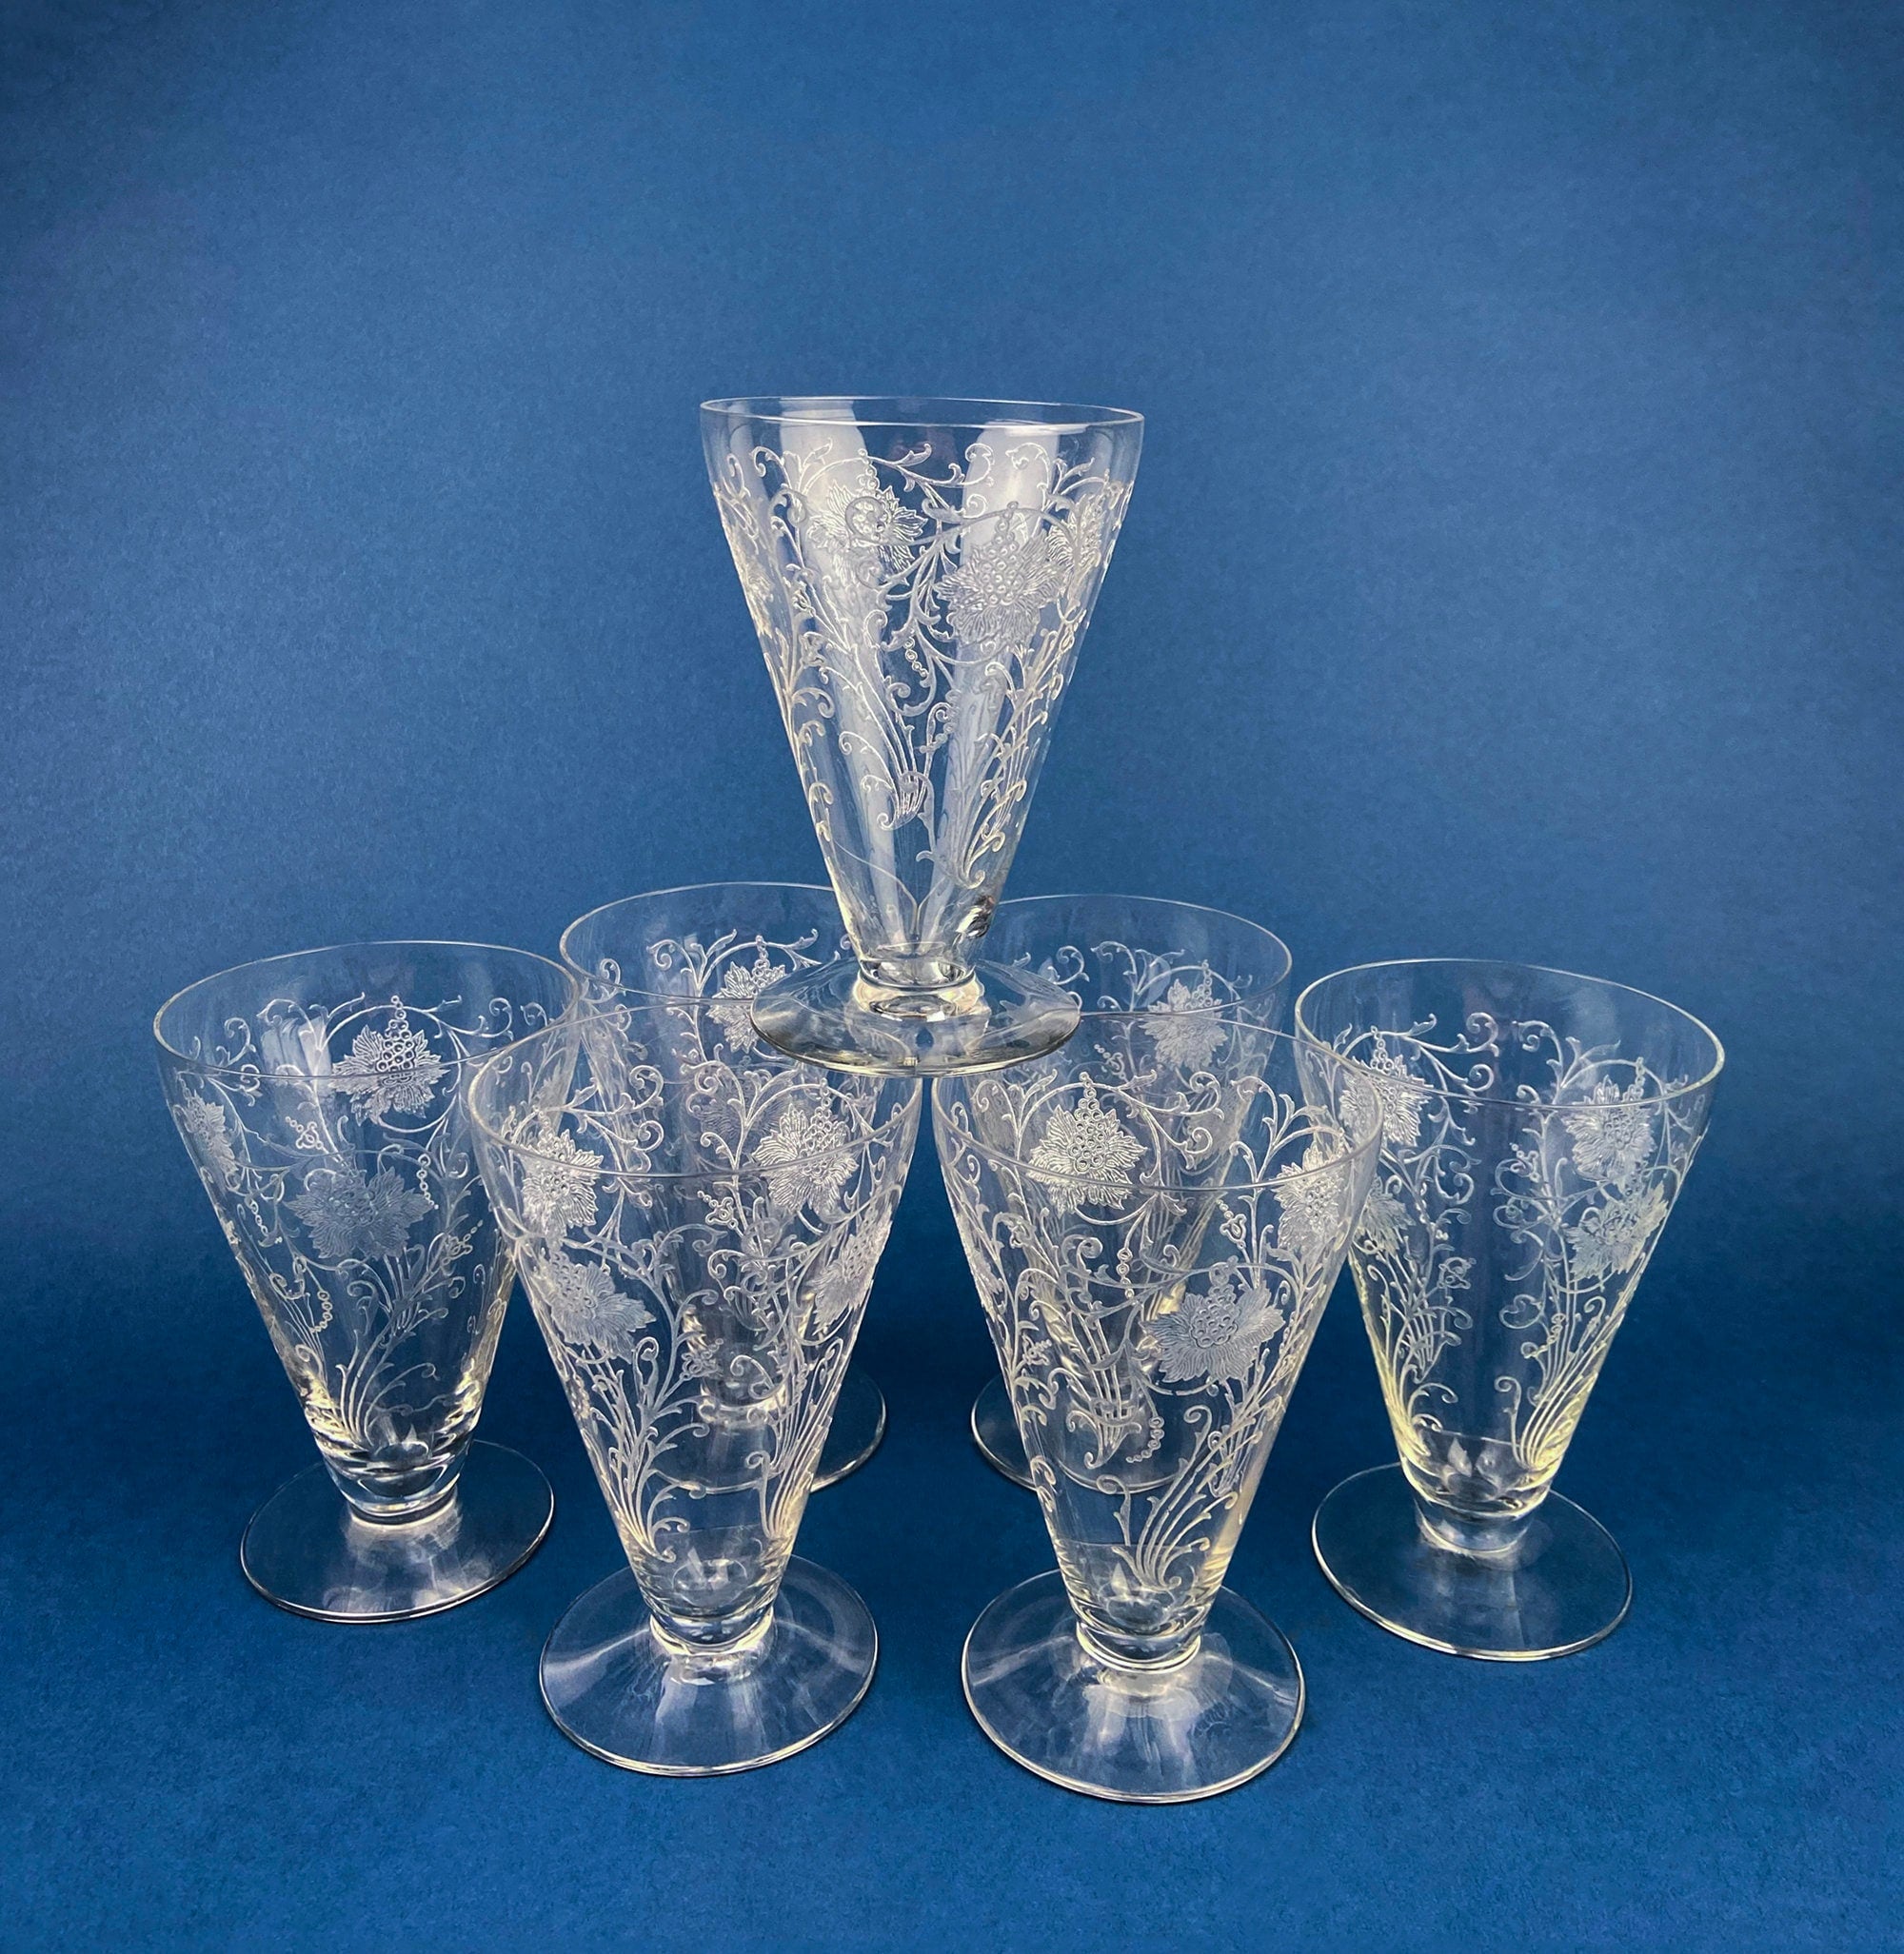 Set of 4 Vintage Stardust Etched Small Martini Glasses